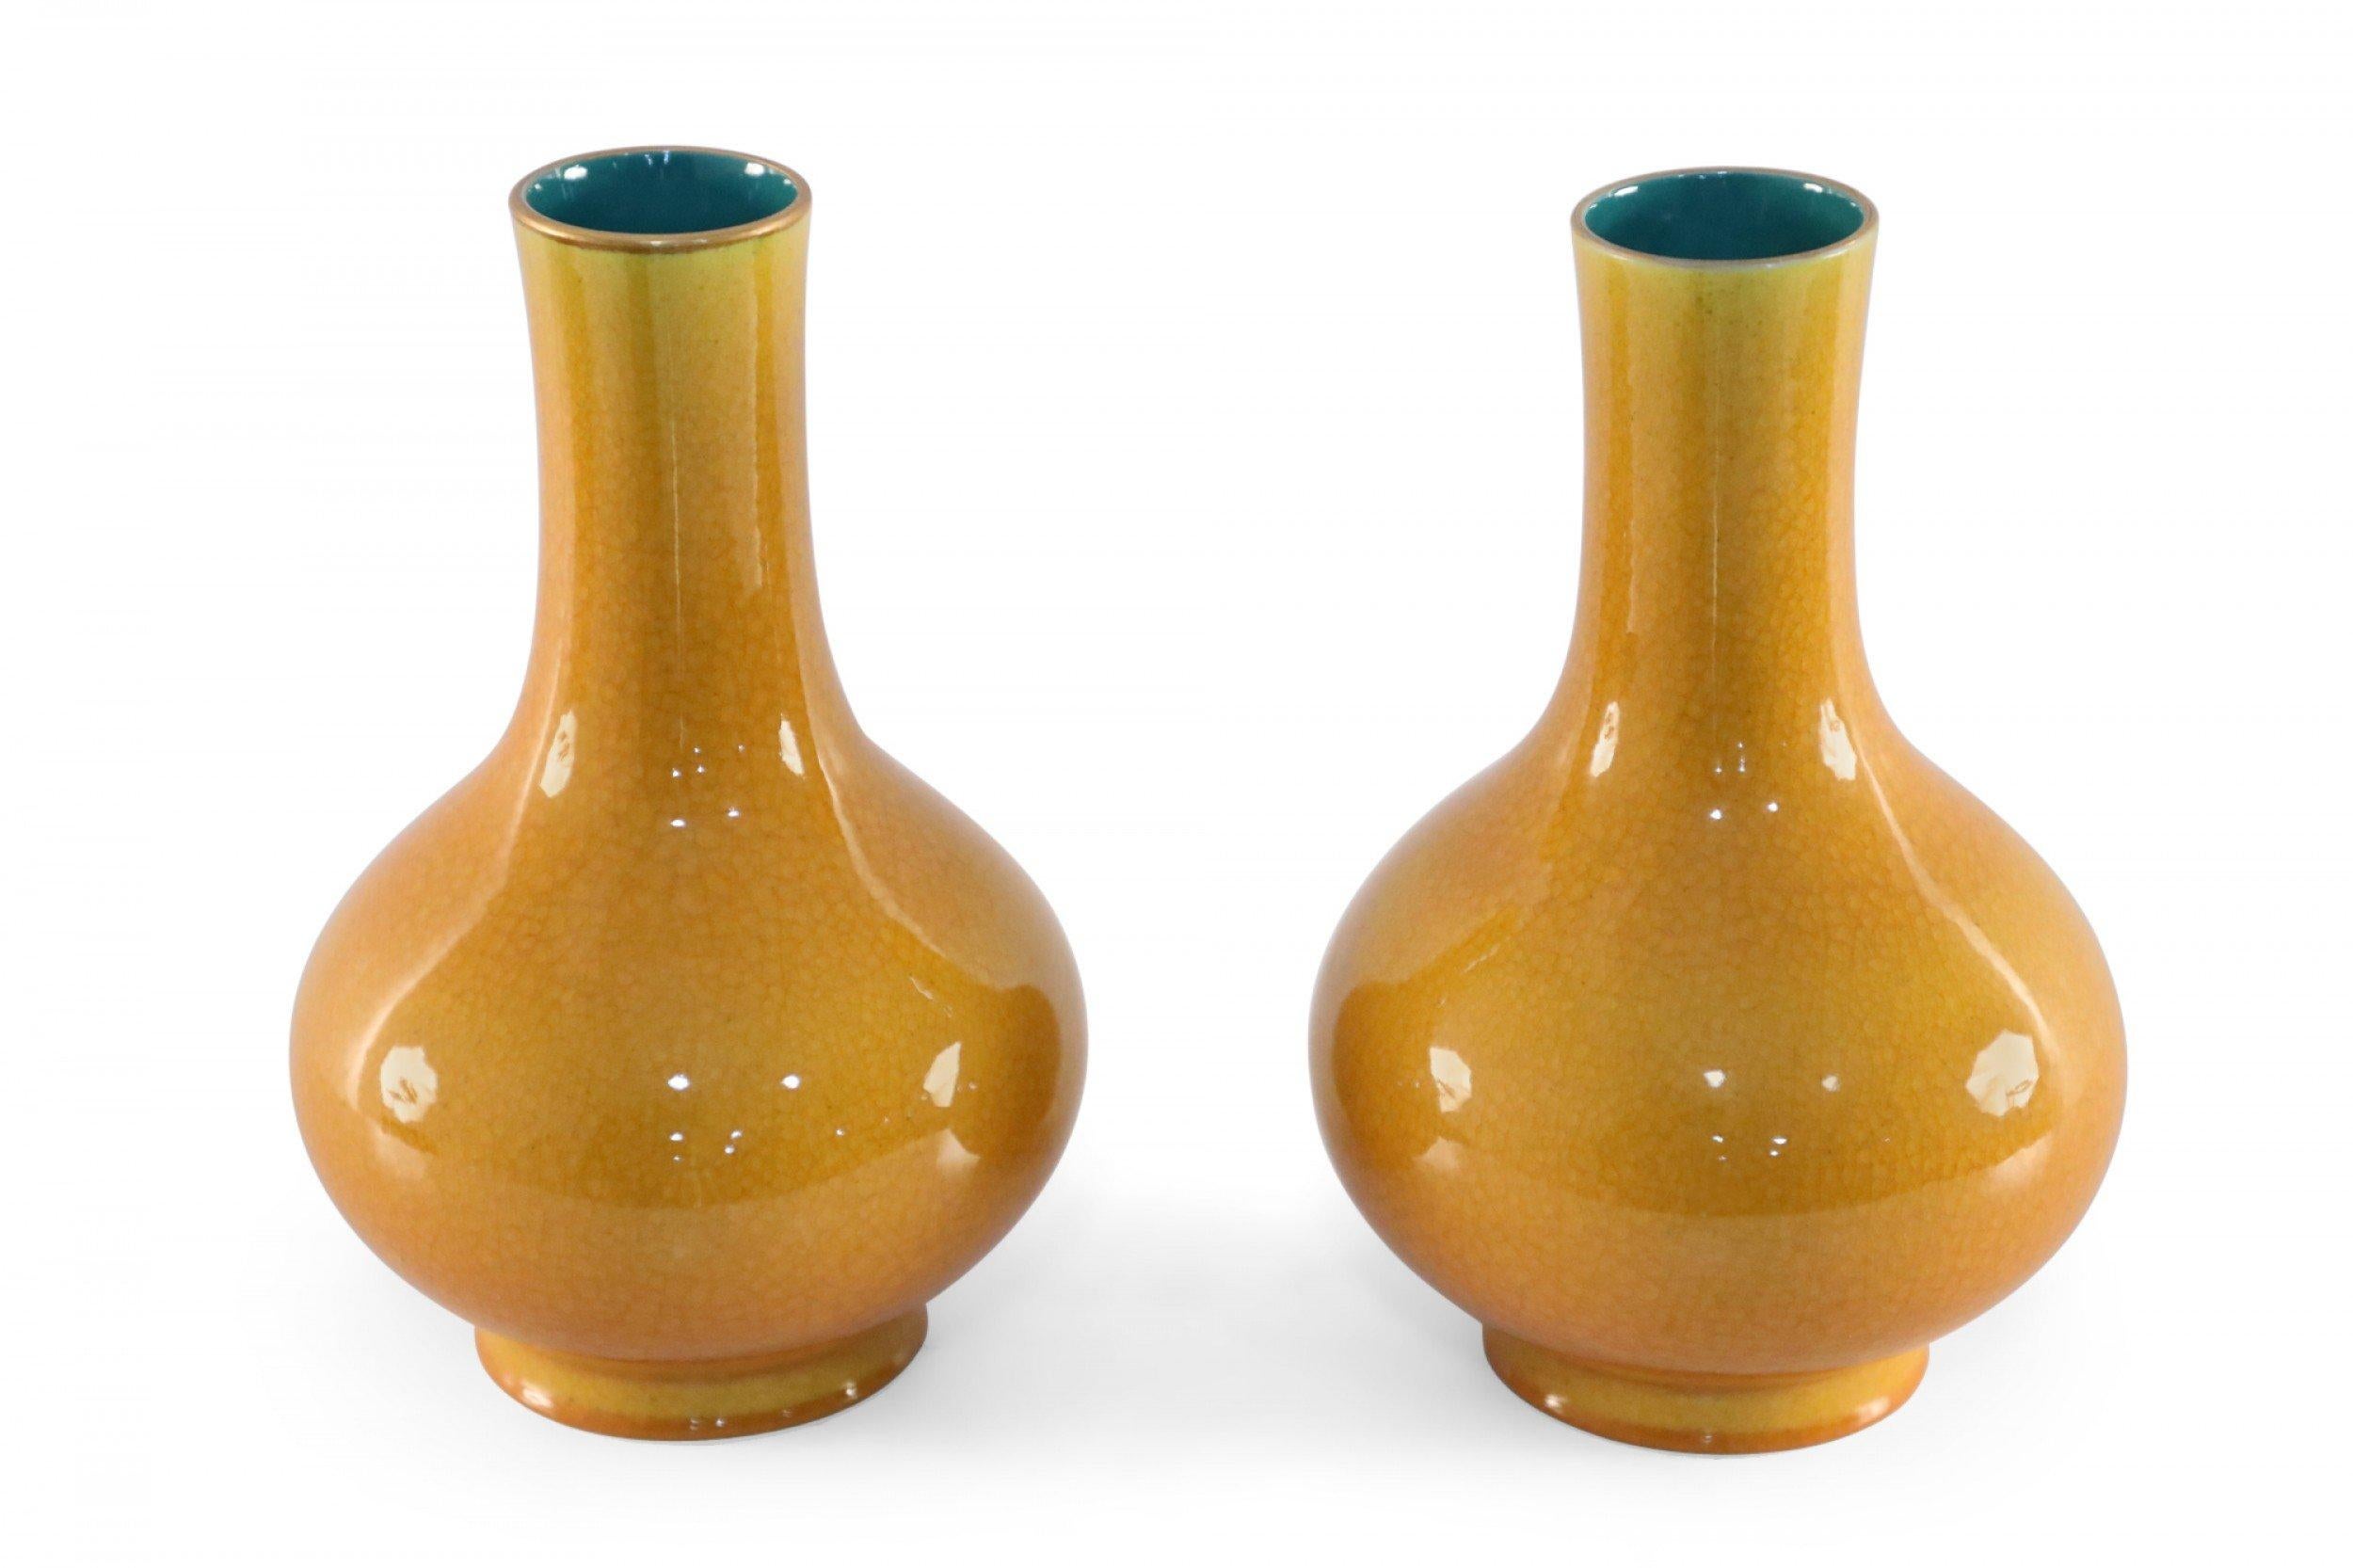 Chinese Export Pair of Yellow Pear Shaped Ceramic Vases